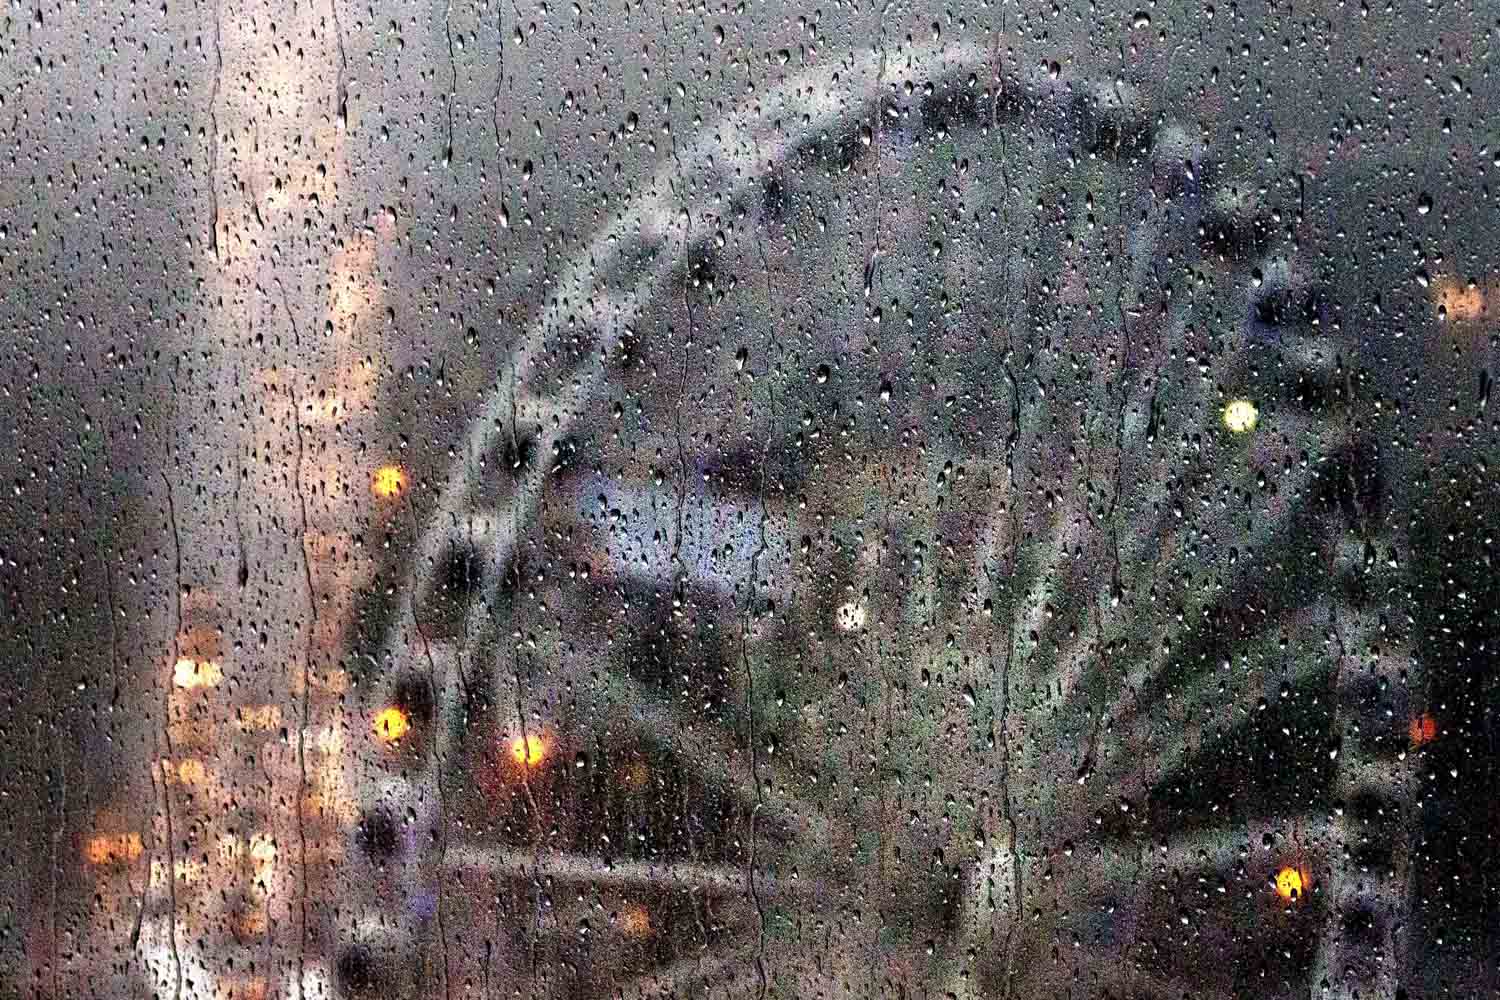 July 17, 2013. Rain drops fall on an office window as heavy rains and high winds pass over the SkyView Atlanta ferris wheel downtown in Atlanta.